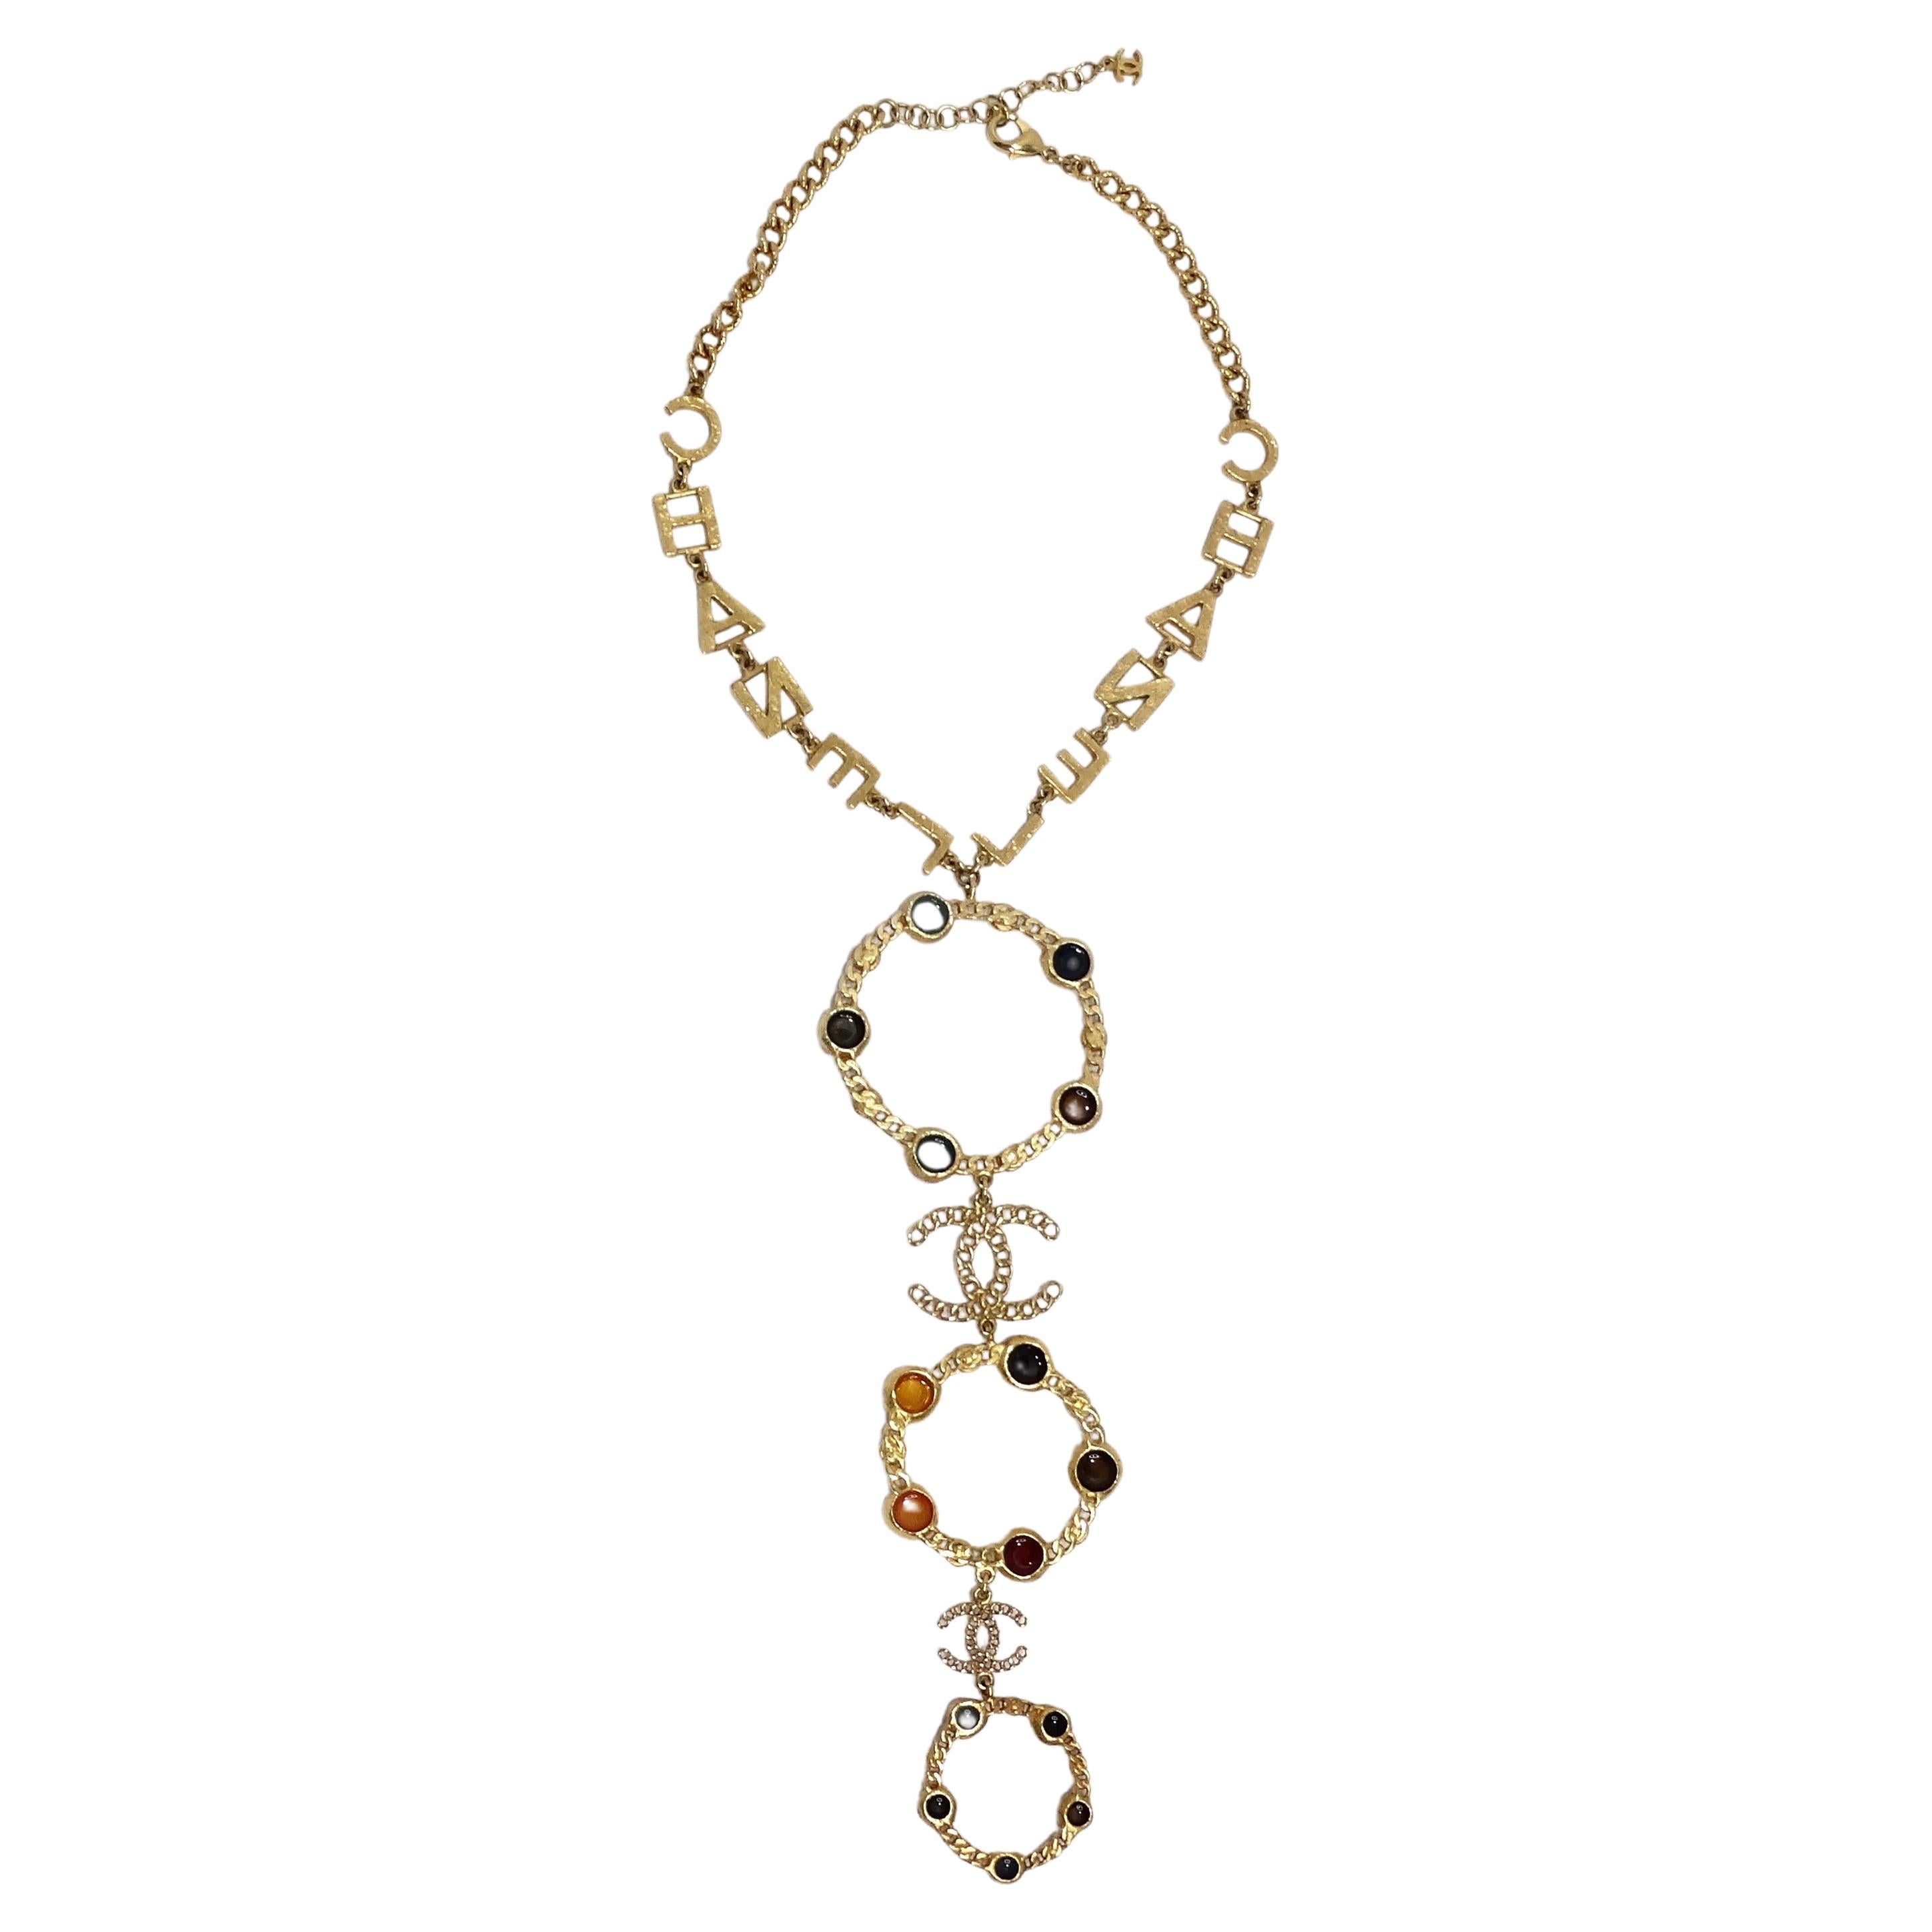 Introducing the Chanel 18K Gold Plated Logo Multi Gemstone Lariat Necklace, a true masterpiece of luxury and elegance. This extraordinary statement piece is a reflection of timeless beauty and sophistication. Chanel is synonymous with style and